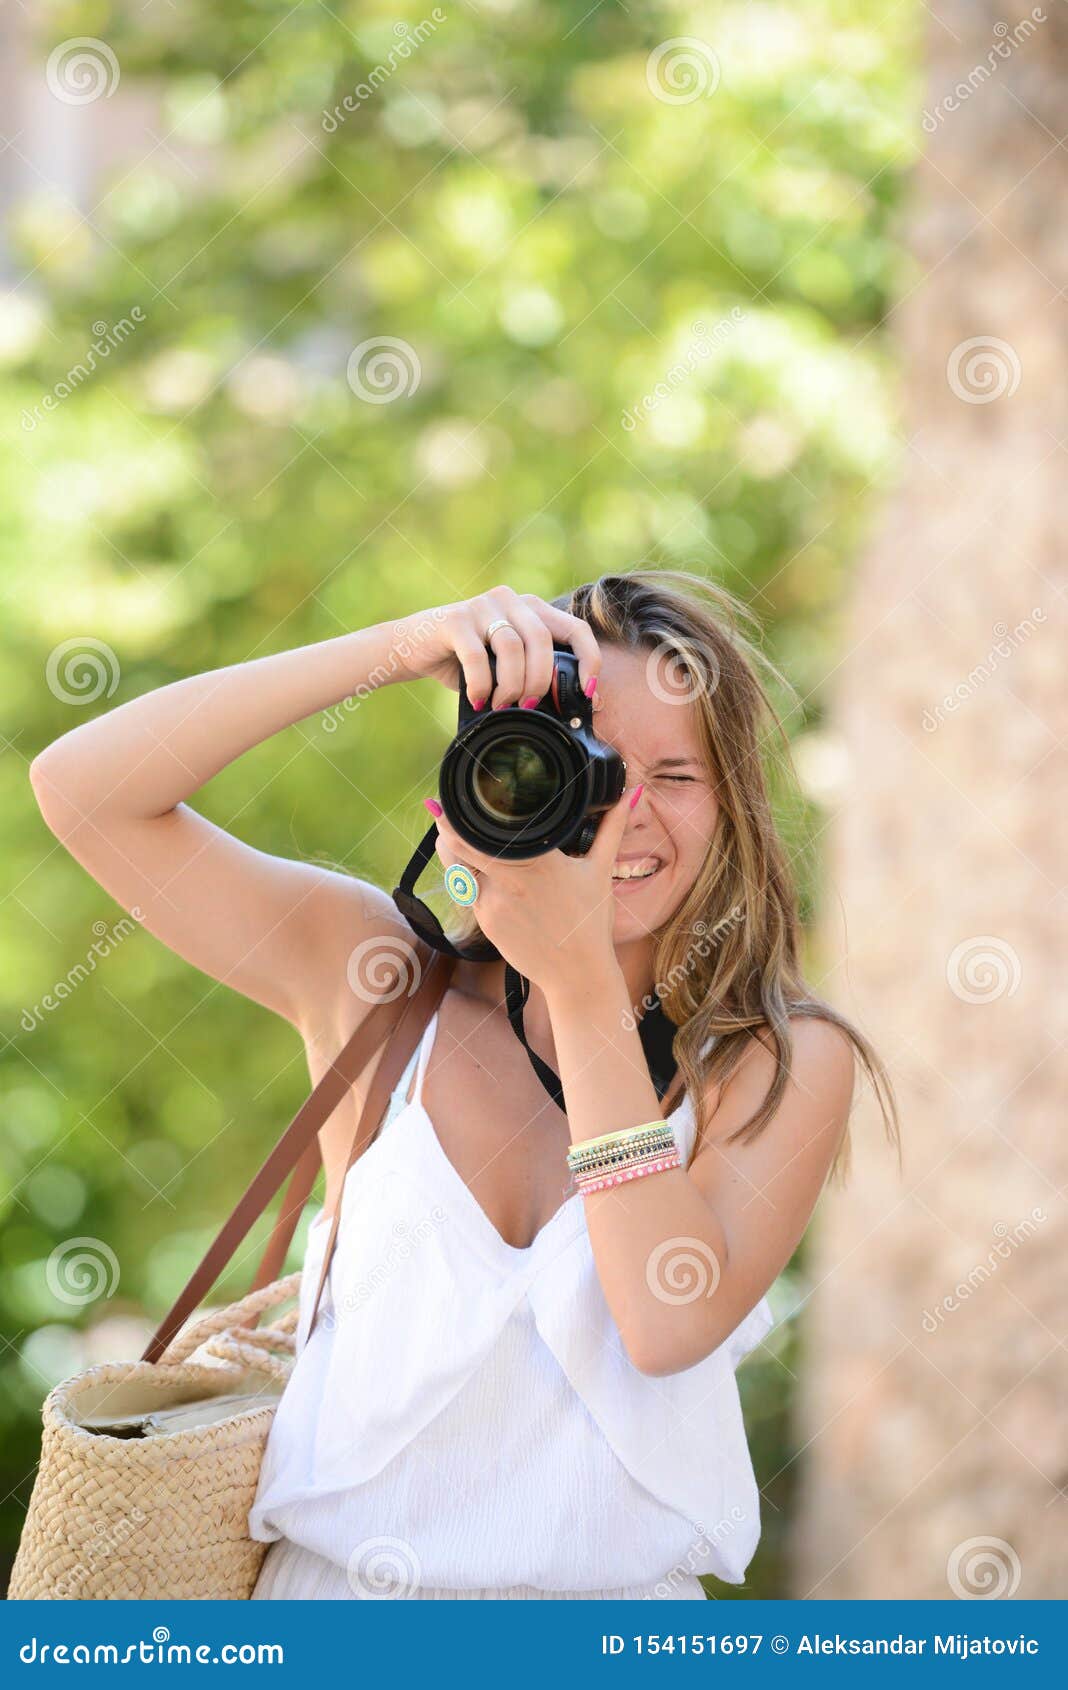 Happy Woman Photographer Holding A Dslr Camera Stock Image